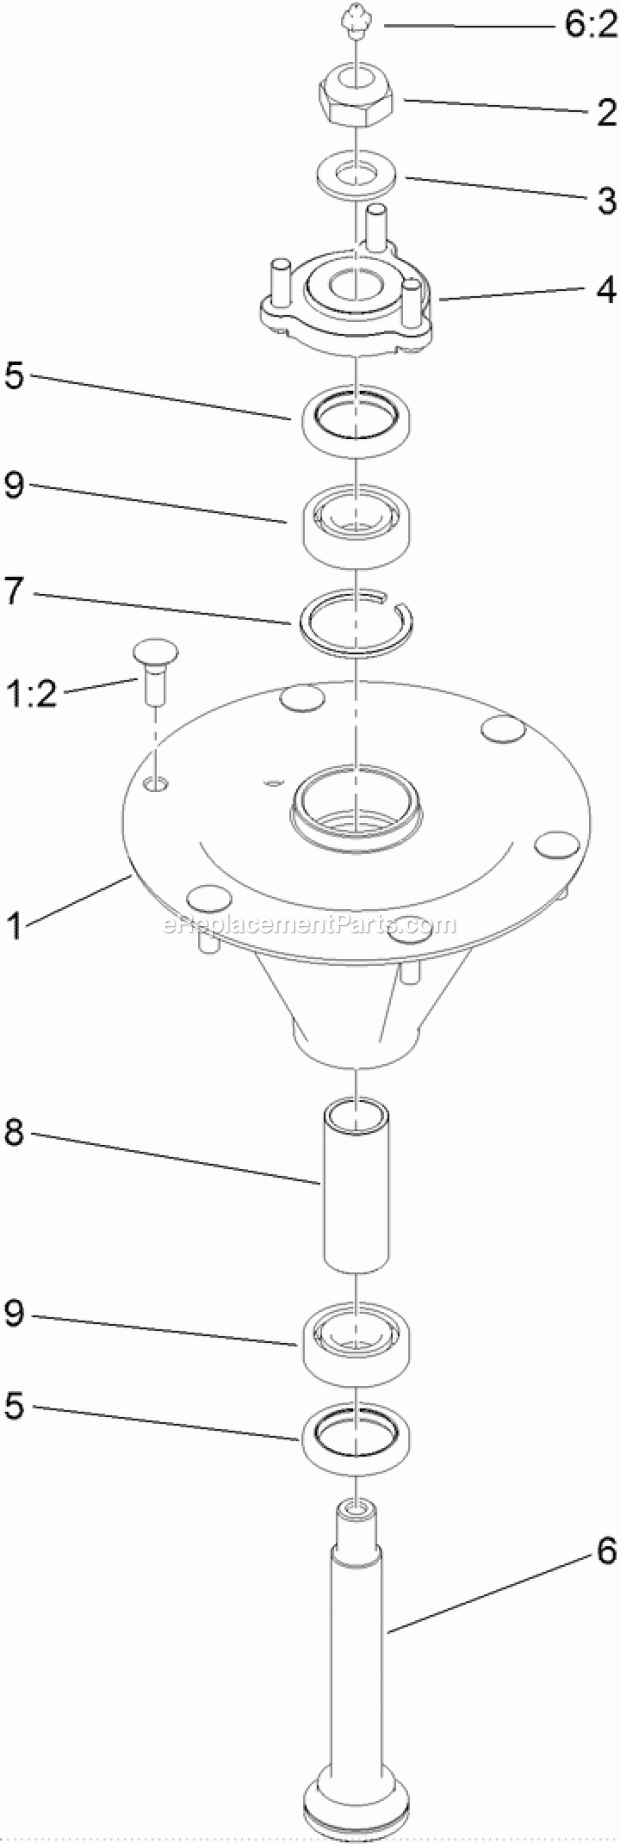 Toro 74267 (312000001-312999999) Z Master Professional 7000 Series Riding Mower, With 60in Turbo Force Side Discharge Mower, 201 Spindle Assembly No. 119-8560 Diagram